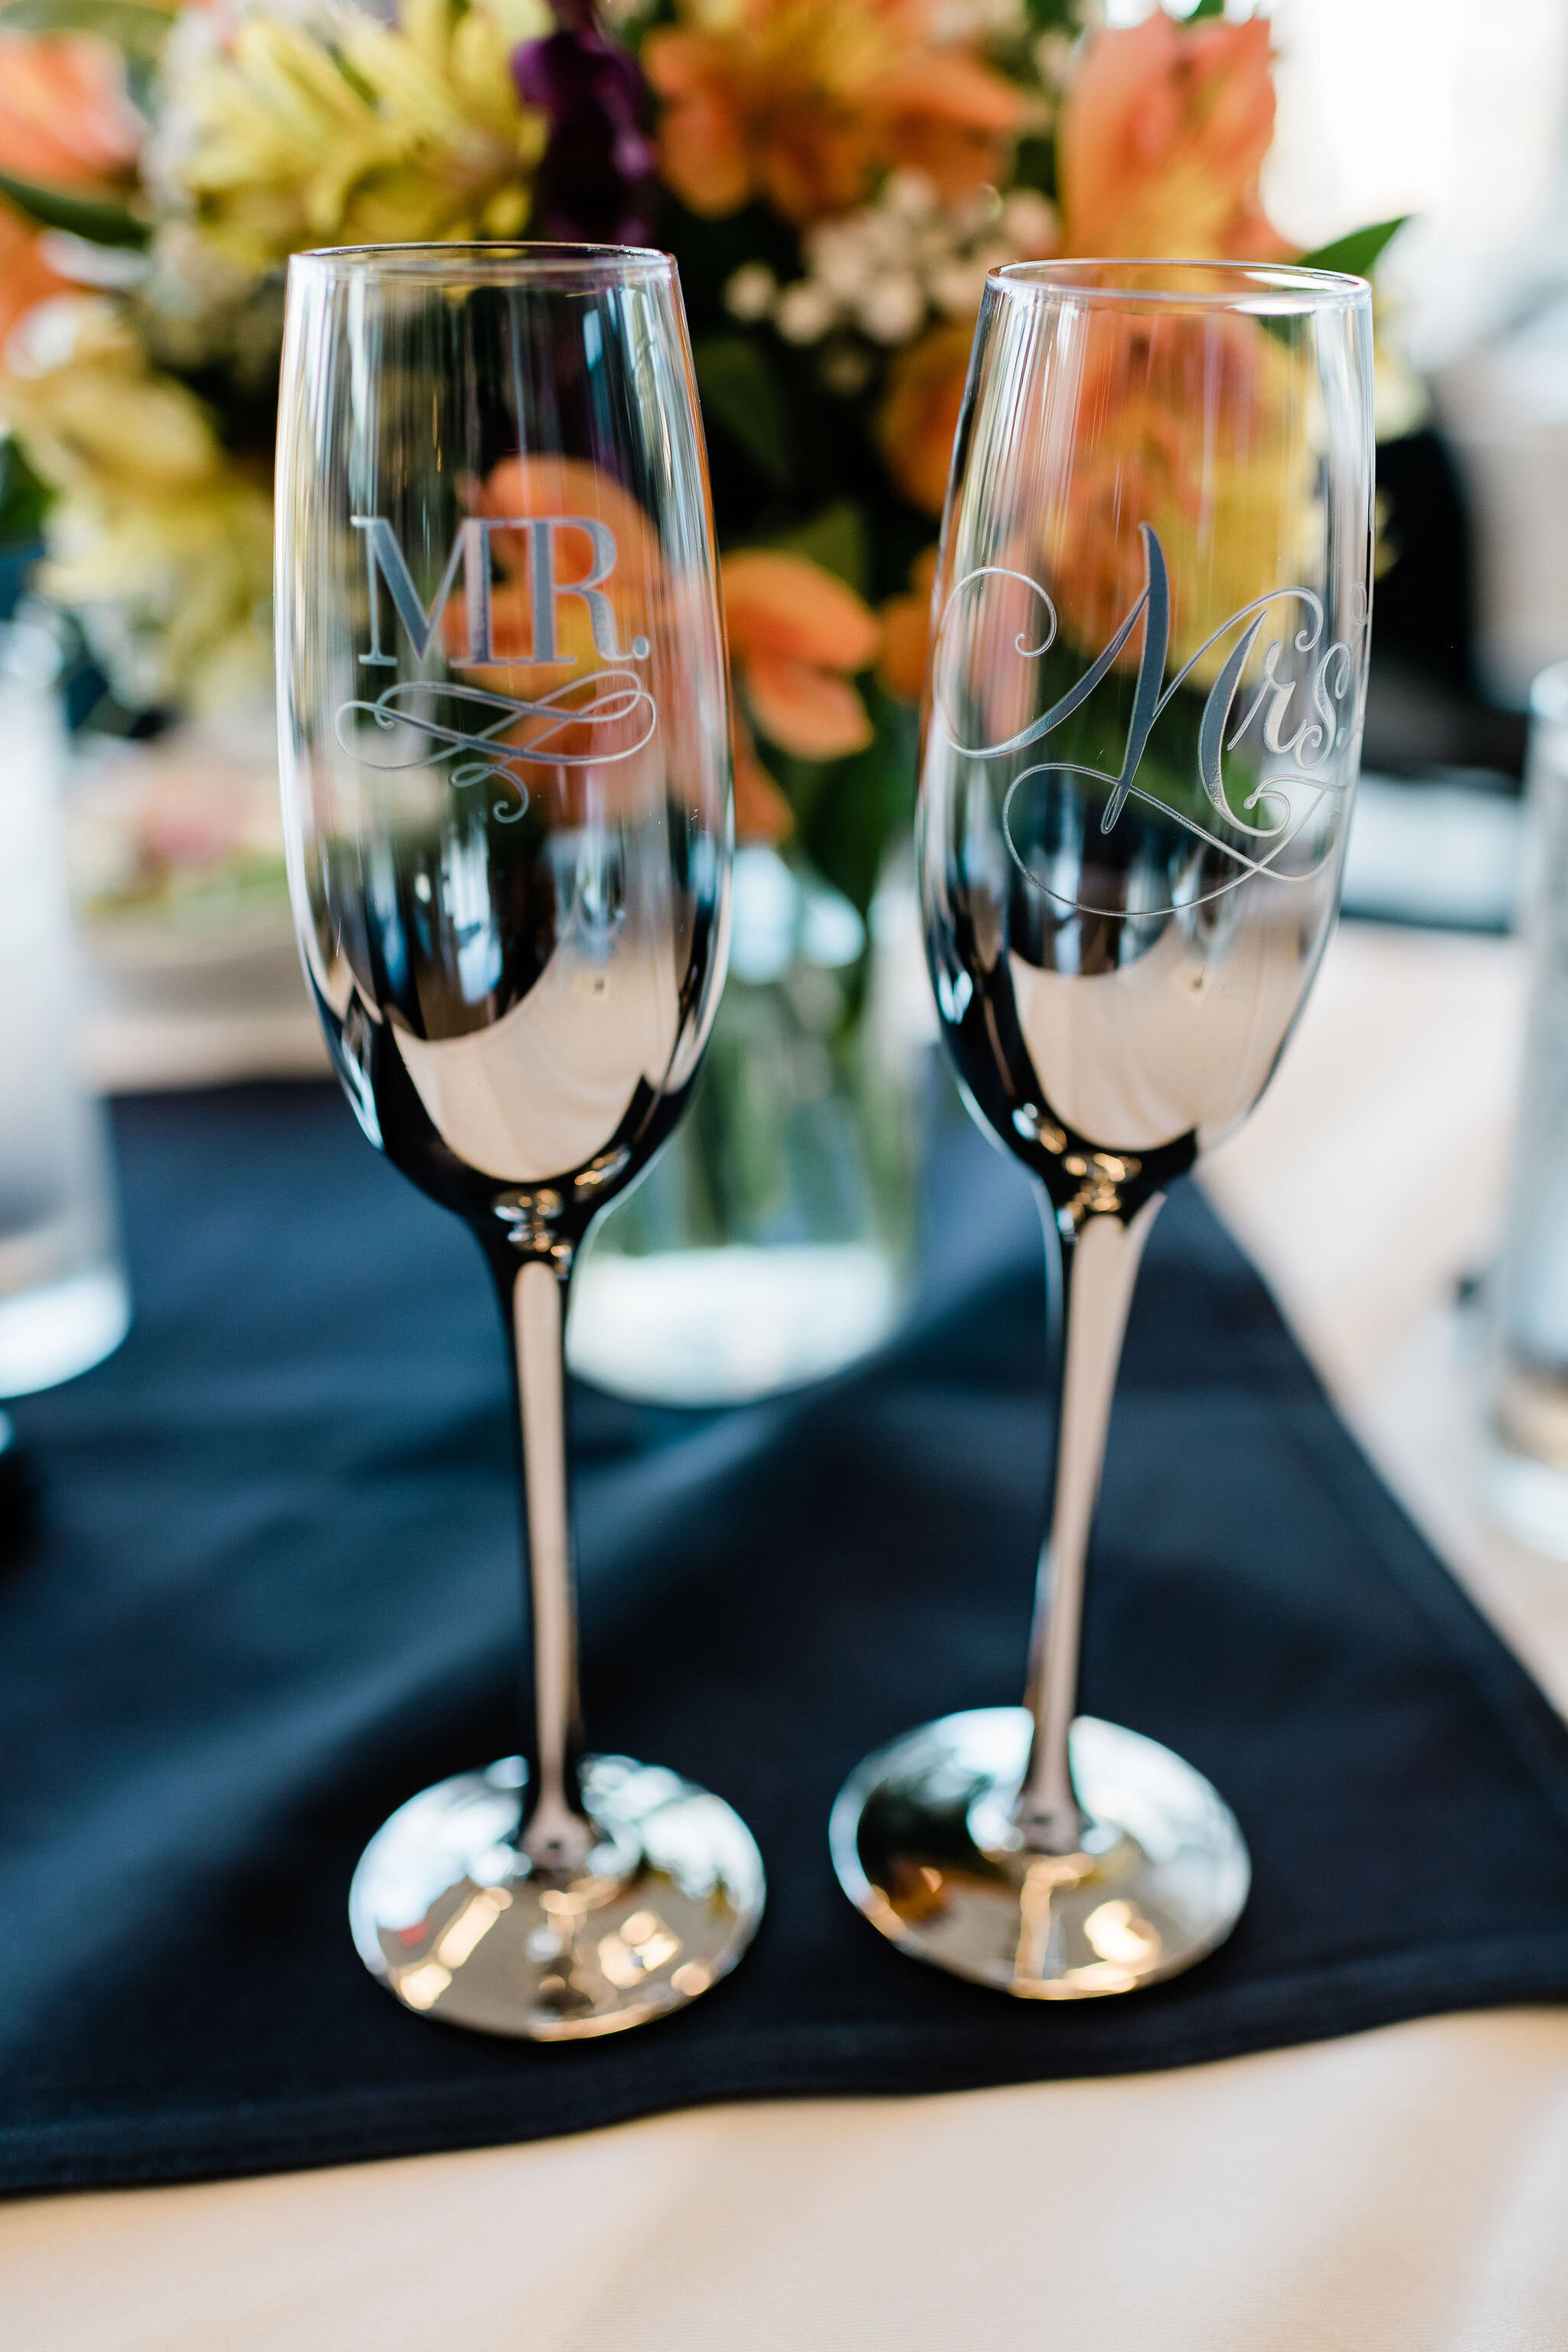 Mr. and Mrs. champagne flutes